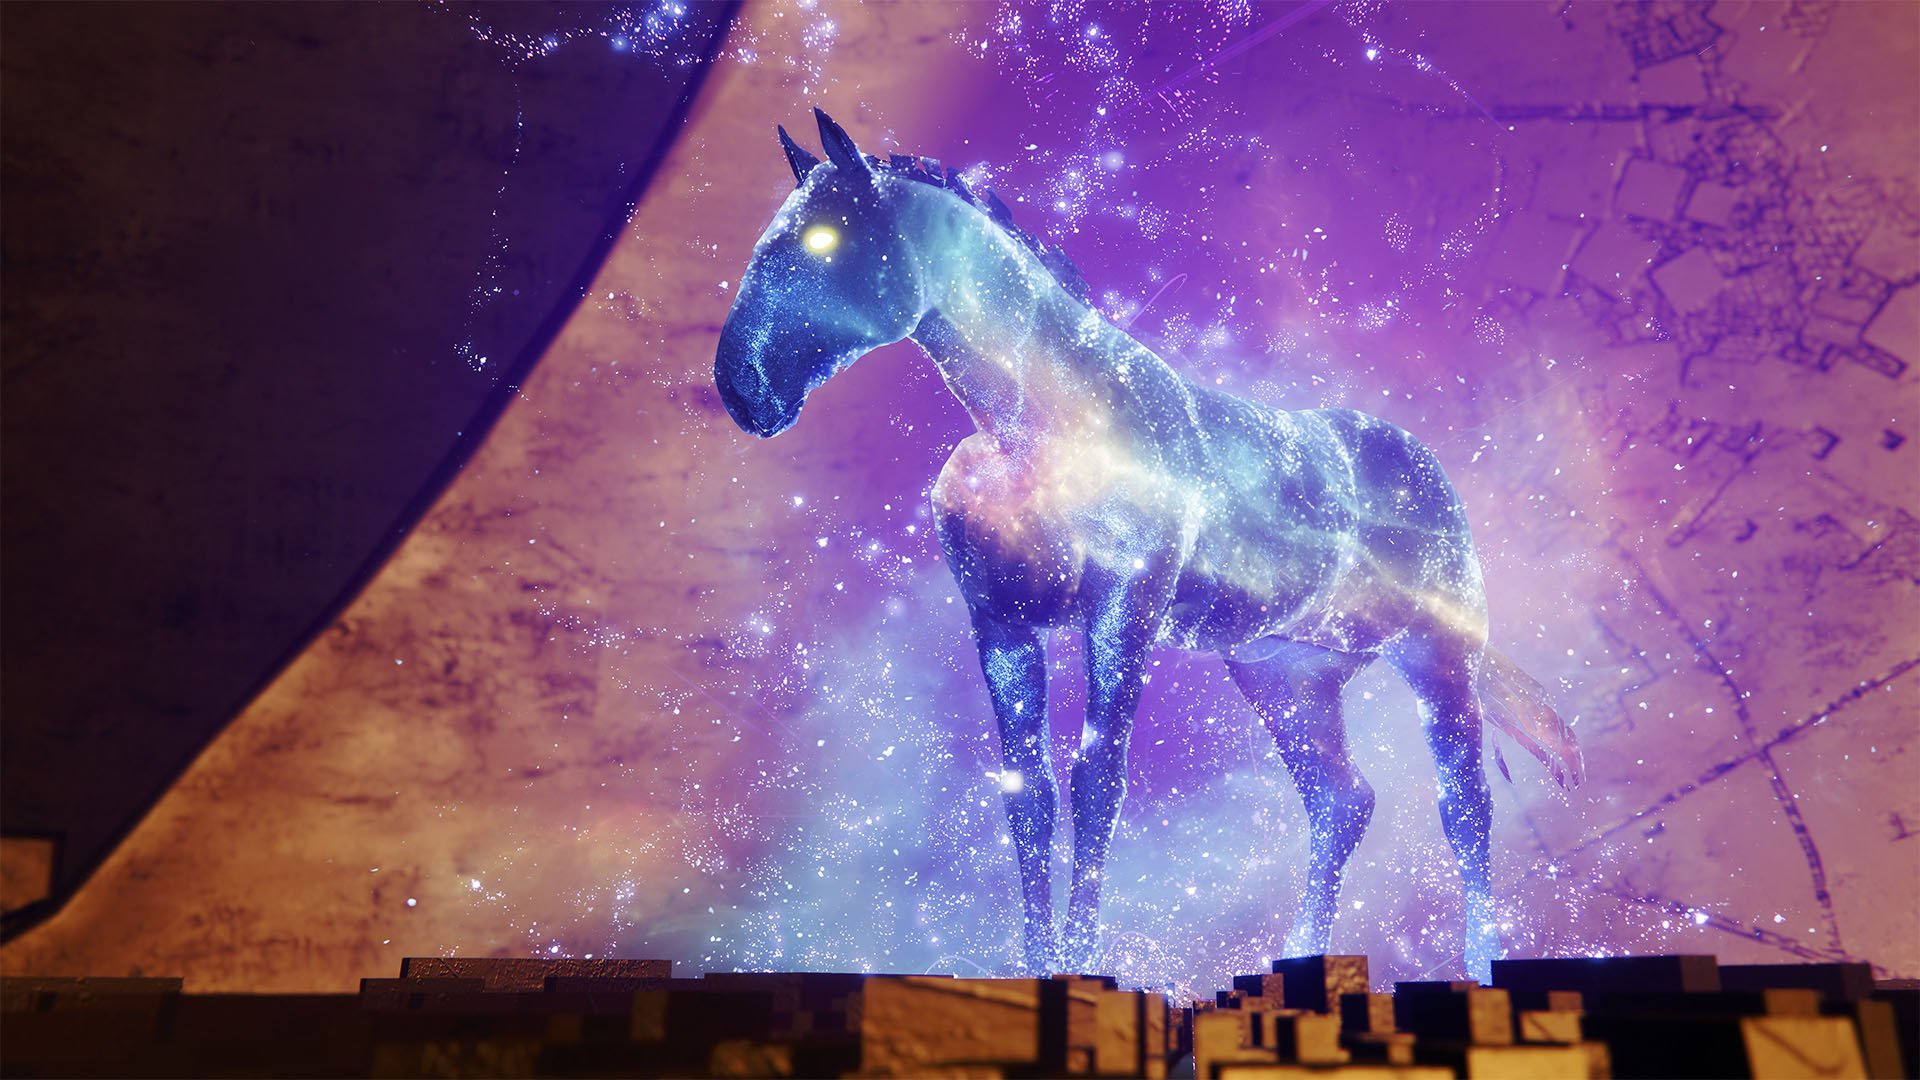 The big new horse in Destiny 2 stands on a platform